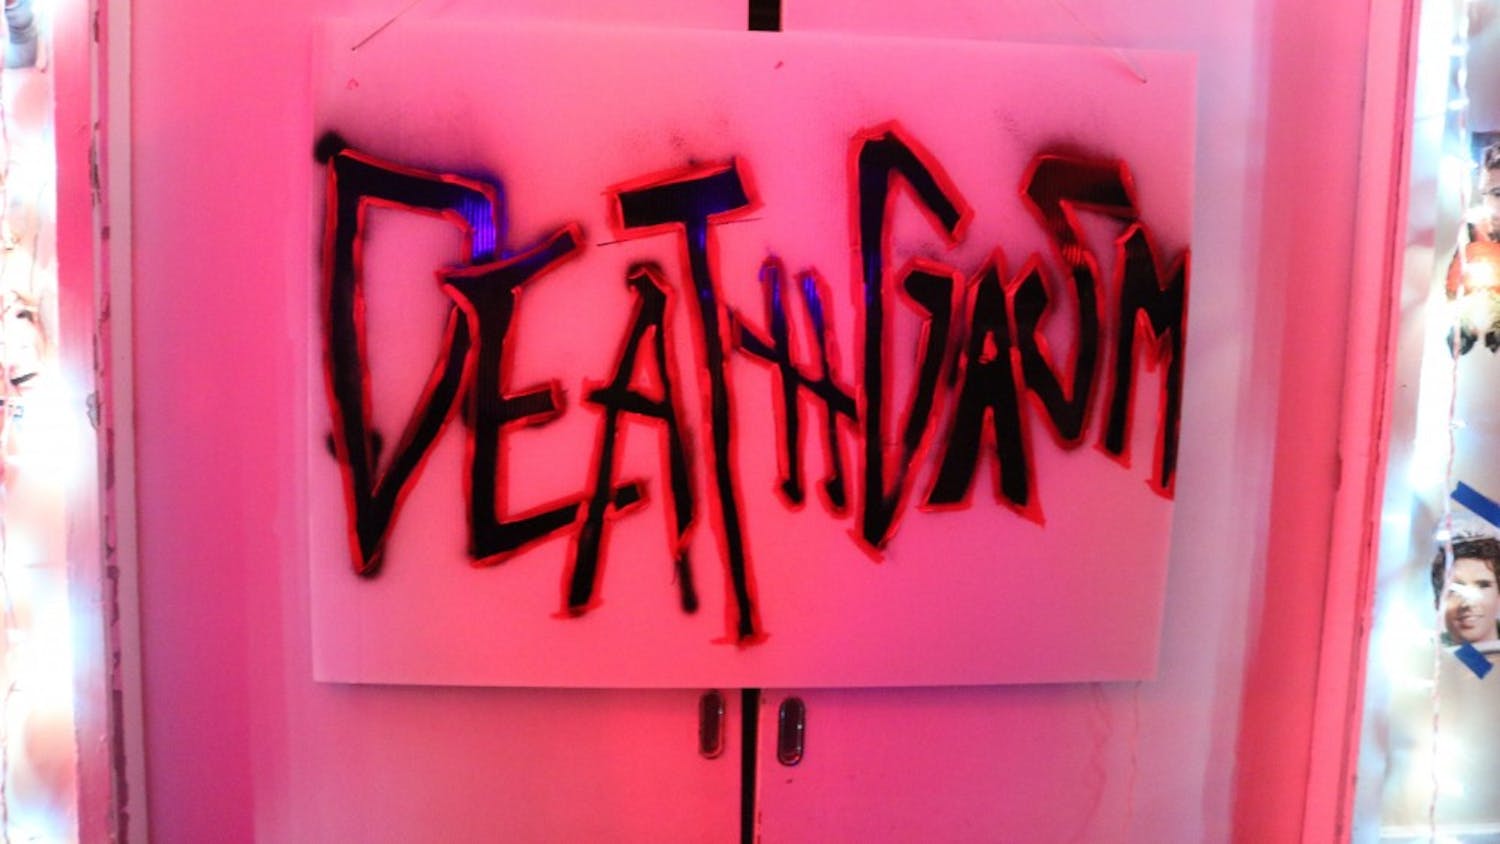 One of St. Anthony Hall's parties last year had the theme "Deathgasm" (courtesy Rachel Blythe)